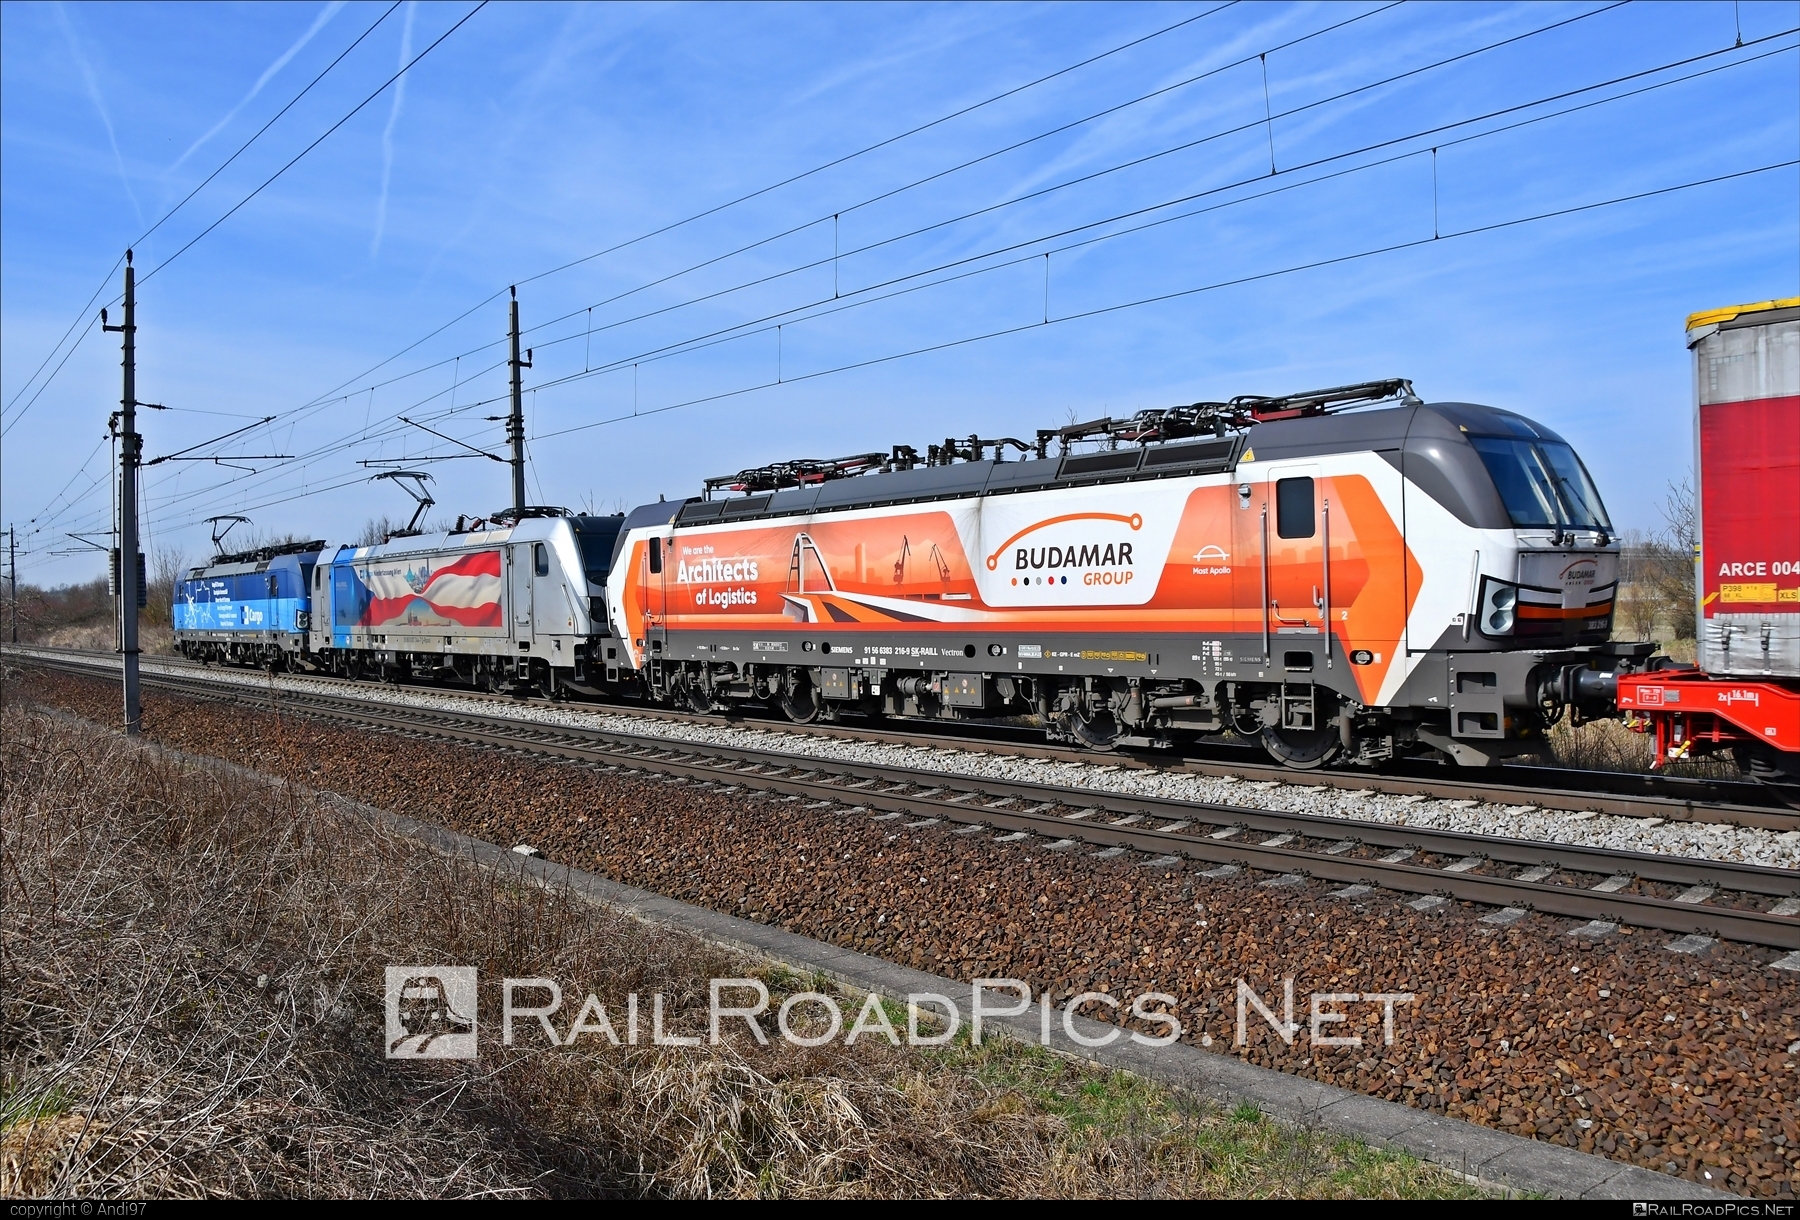 Siemens Vectron MS - 383 216-9 operated by LOKORAIL, a.s. #RollingStockLease #RollingStockLeaseSro #budamar #lokorail #lrl #raill #siemens #siemensVectron #siemensVectronMS #vectron #vectronMS